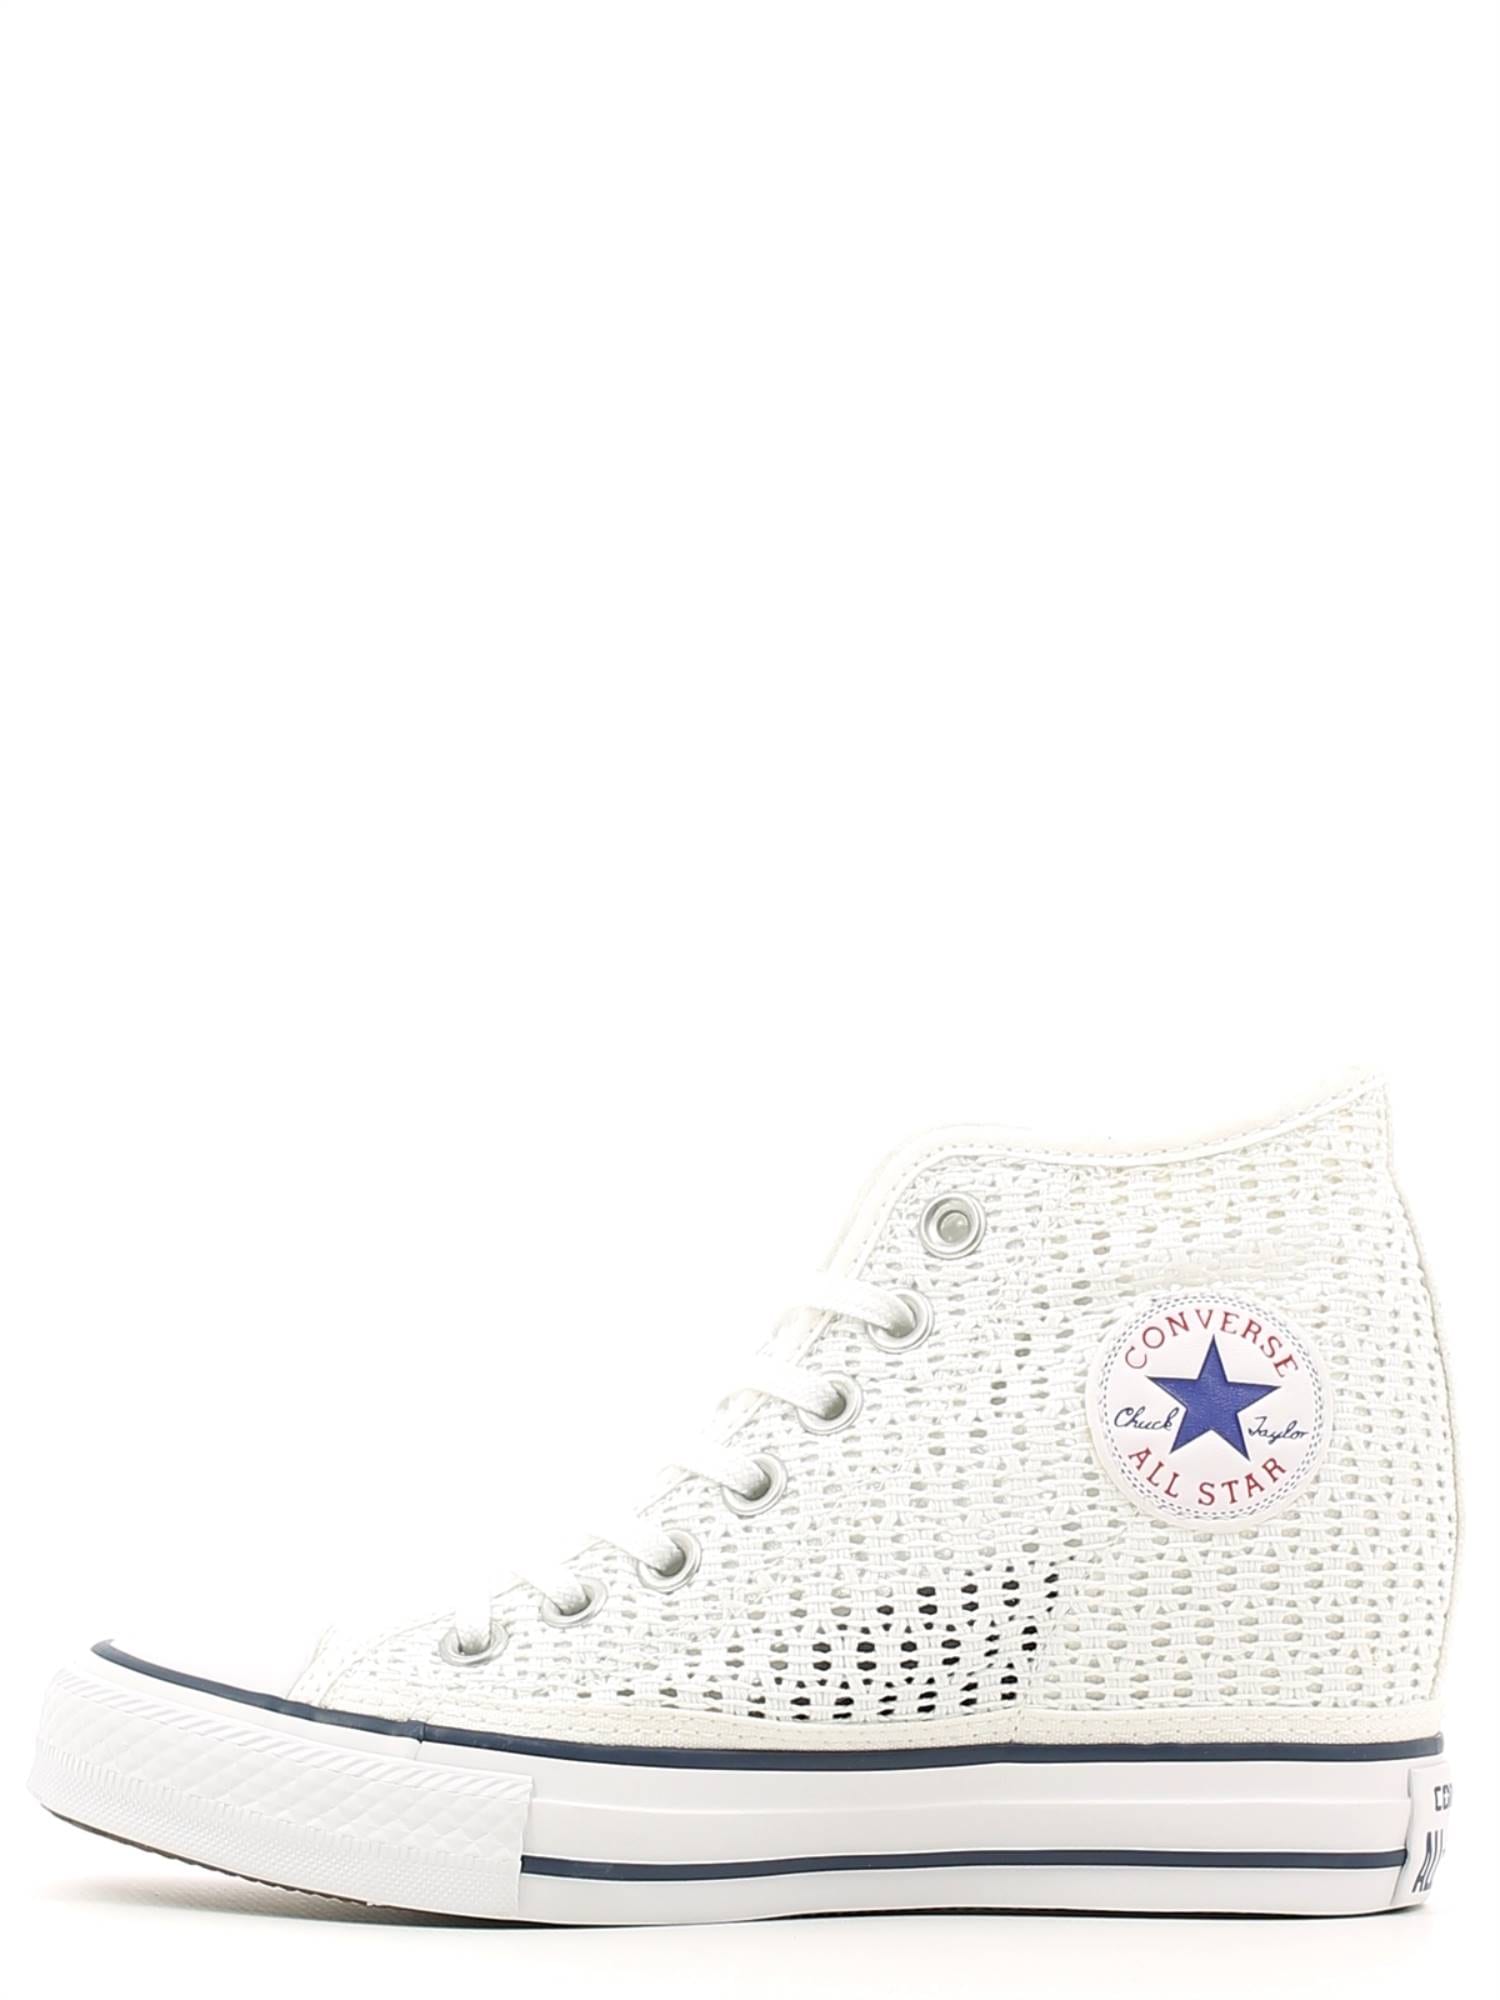 Converse : Chuck Taylor All Star mid lux tiny crochet White/white | o-zone  shop